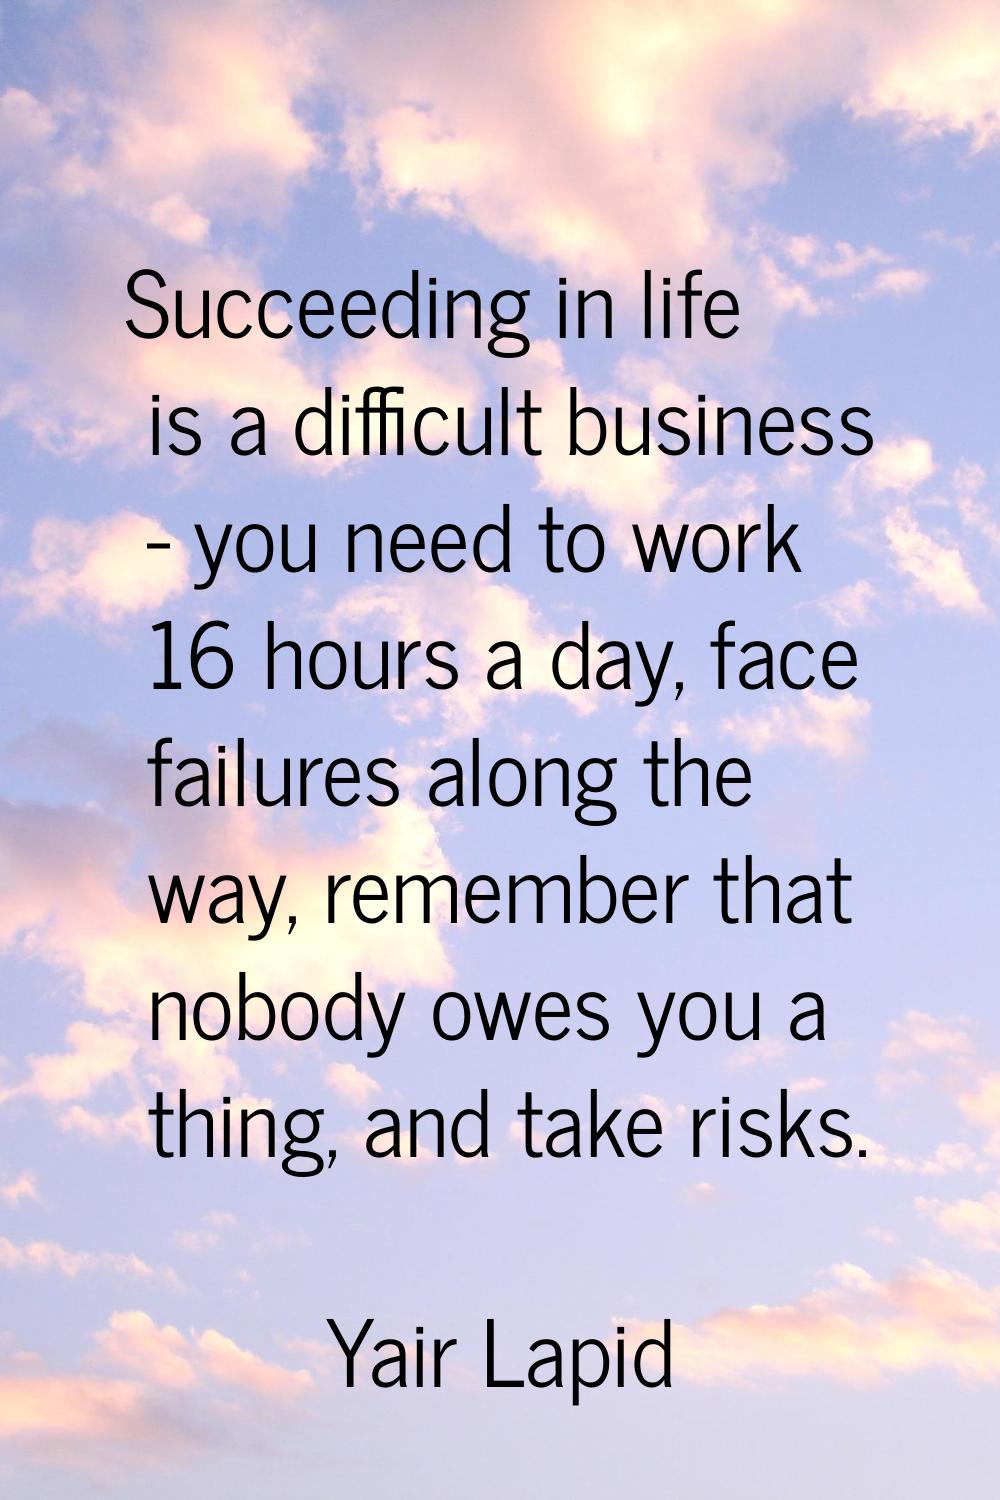 Succeeding in life is a difficult business - you need to work 16 hours a day, face failures along t